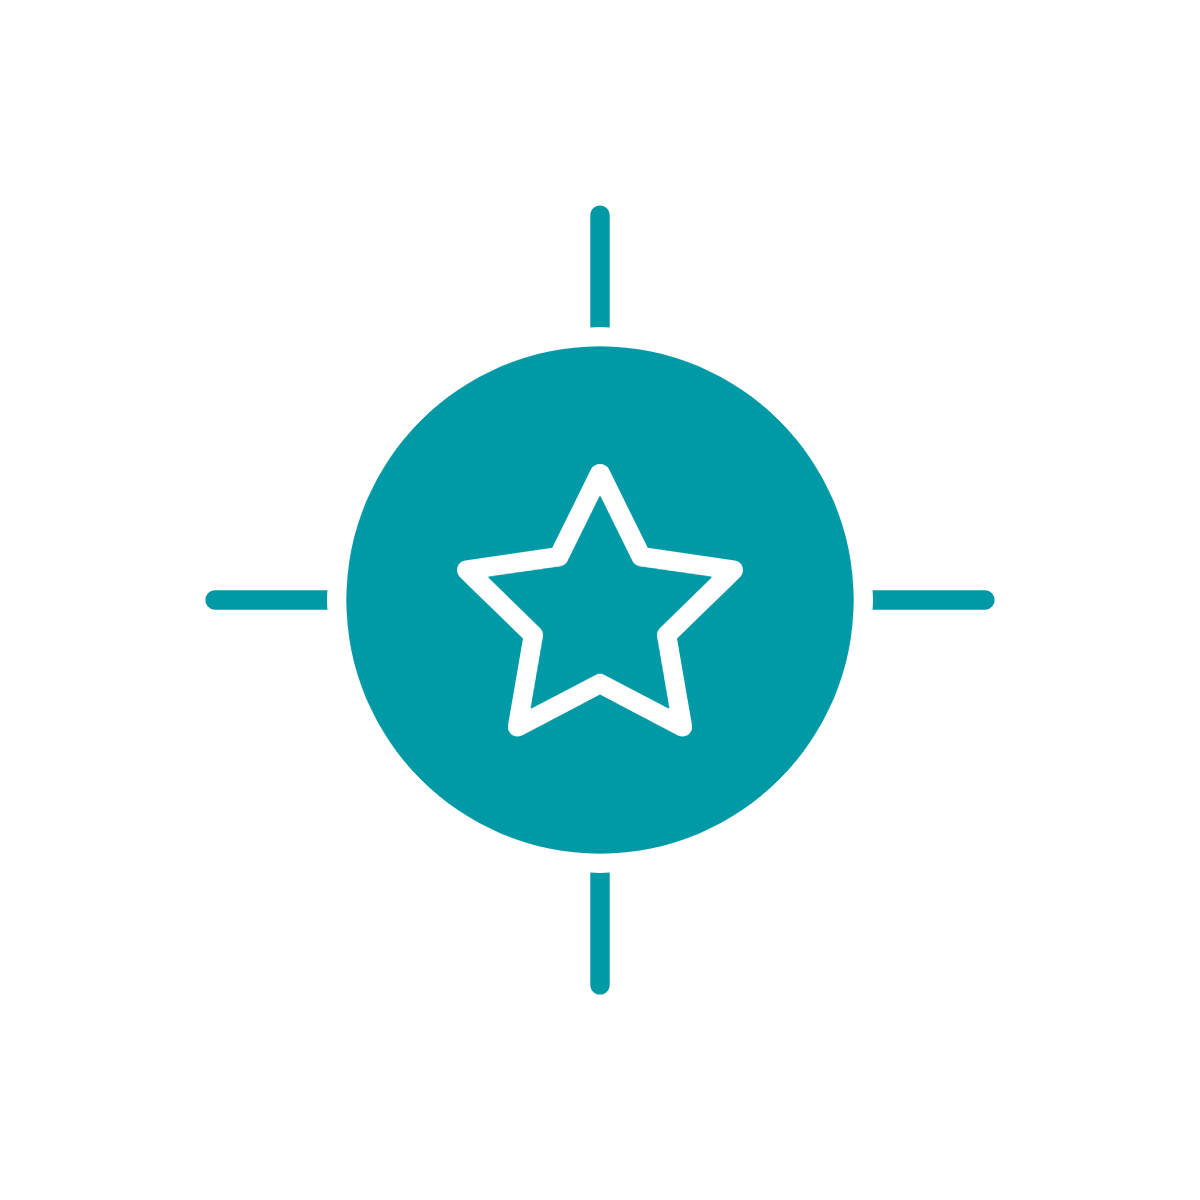 Green icon of star within target